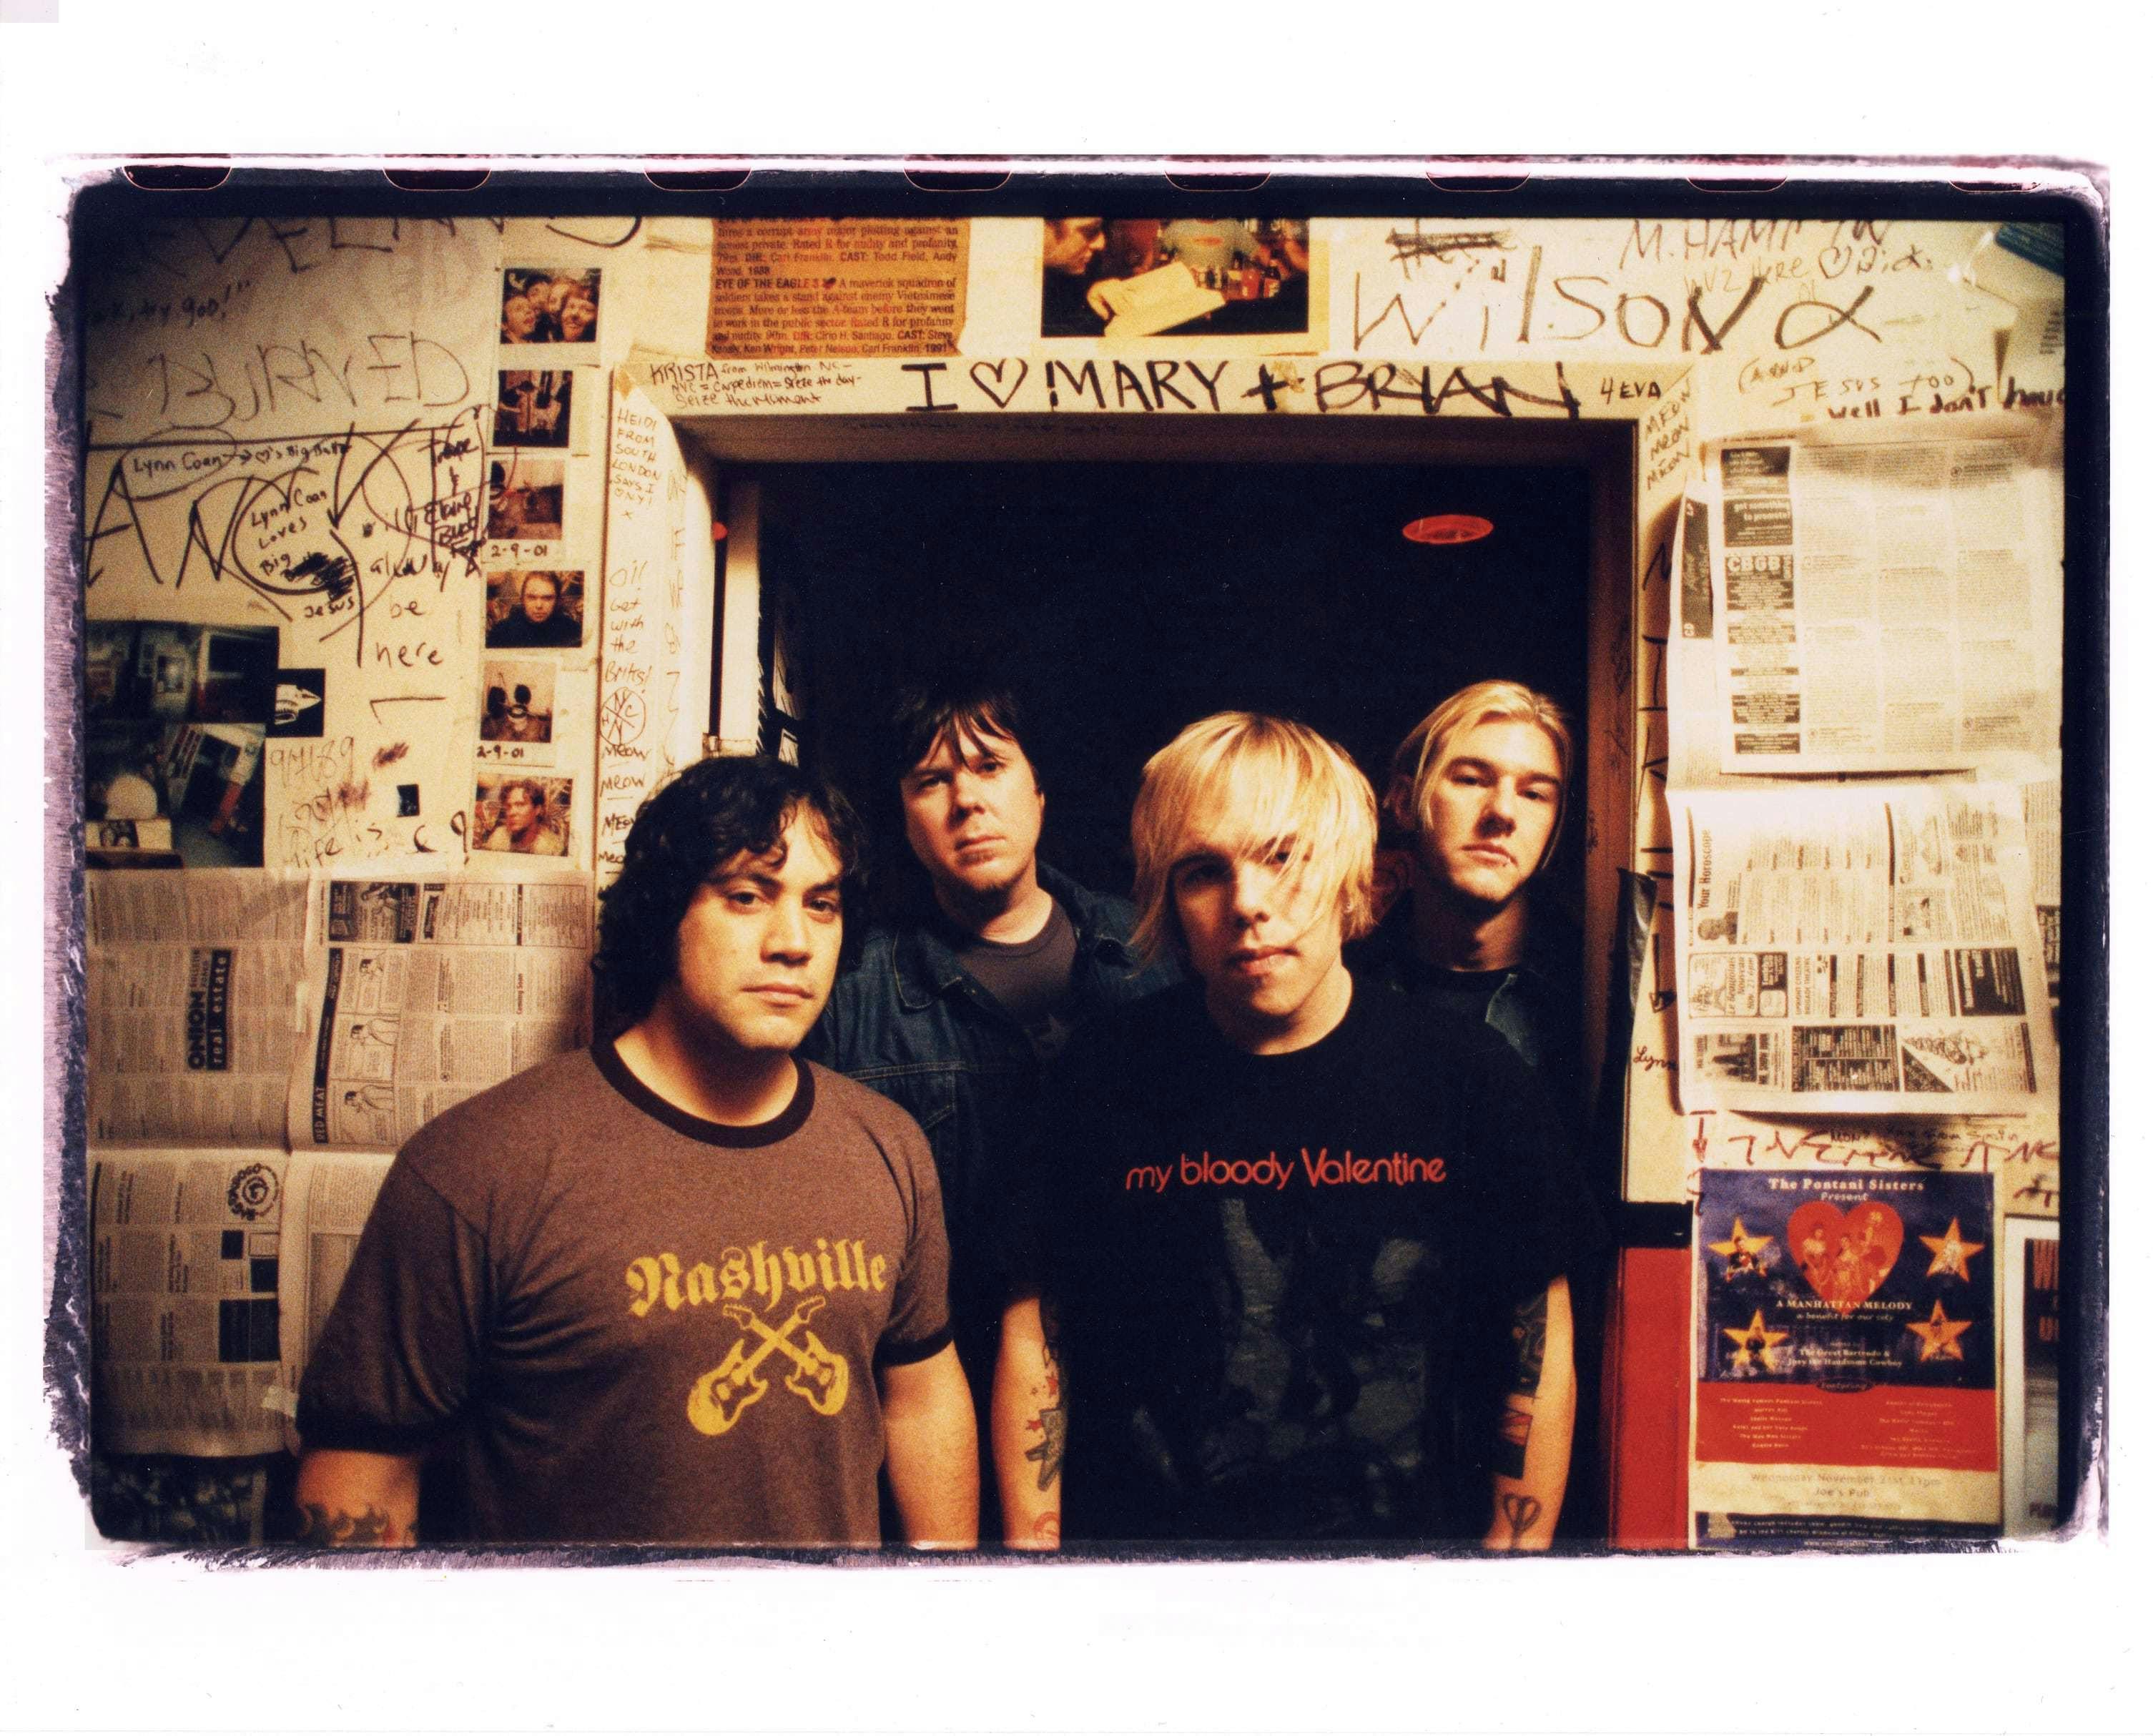 Former Ataris Bassist Michael Davenport Indicted On Conspiracy And Fraud Charges